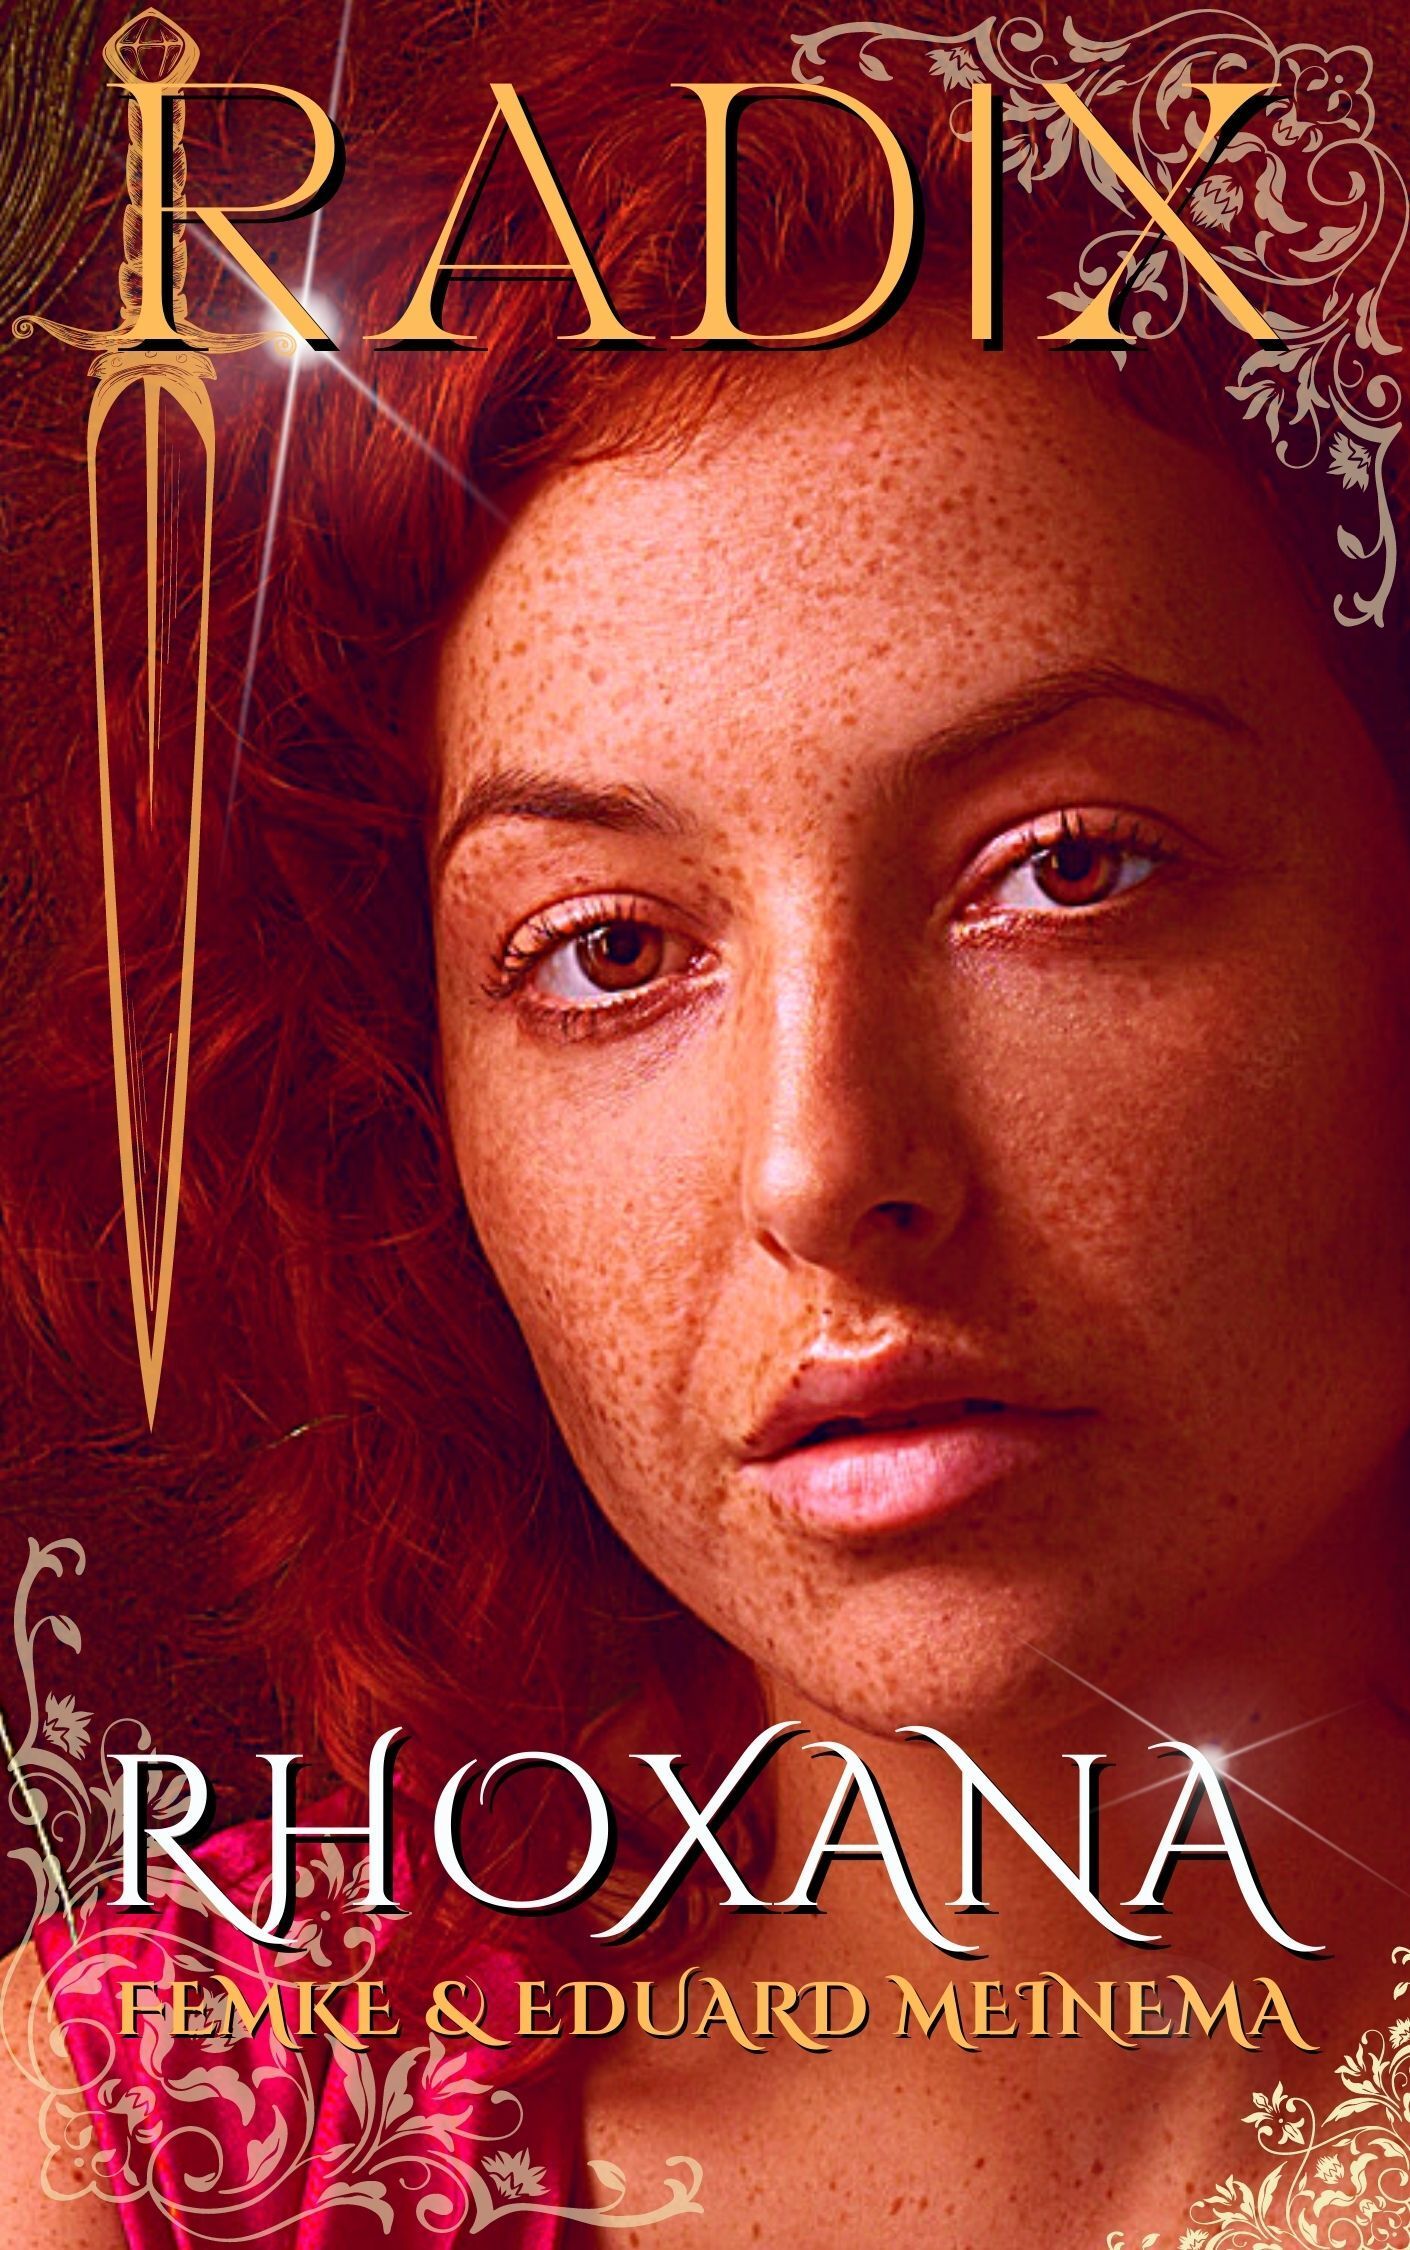 Rhoxana, Radix Book # 1, Urban Fantasy series about the witches of the Void and Awides